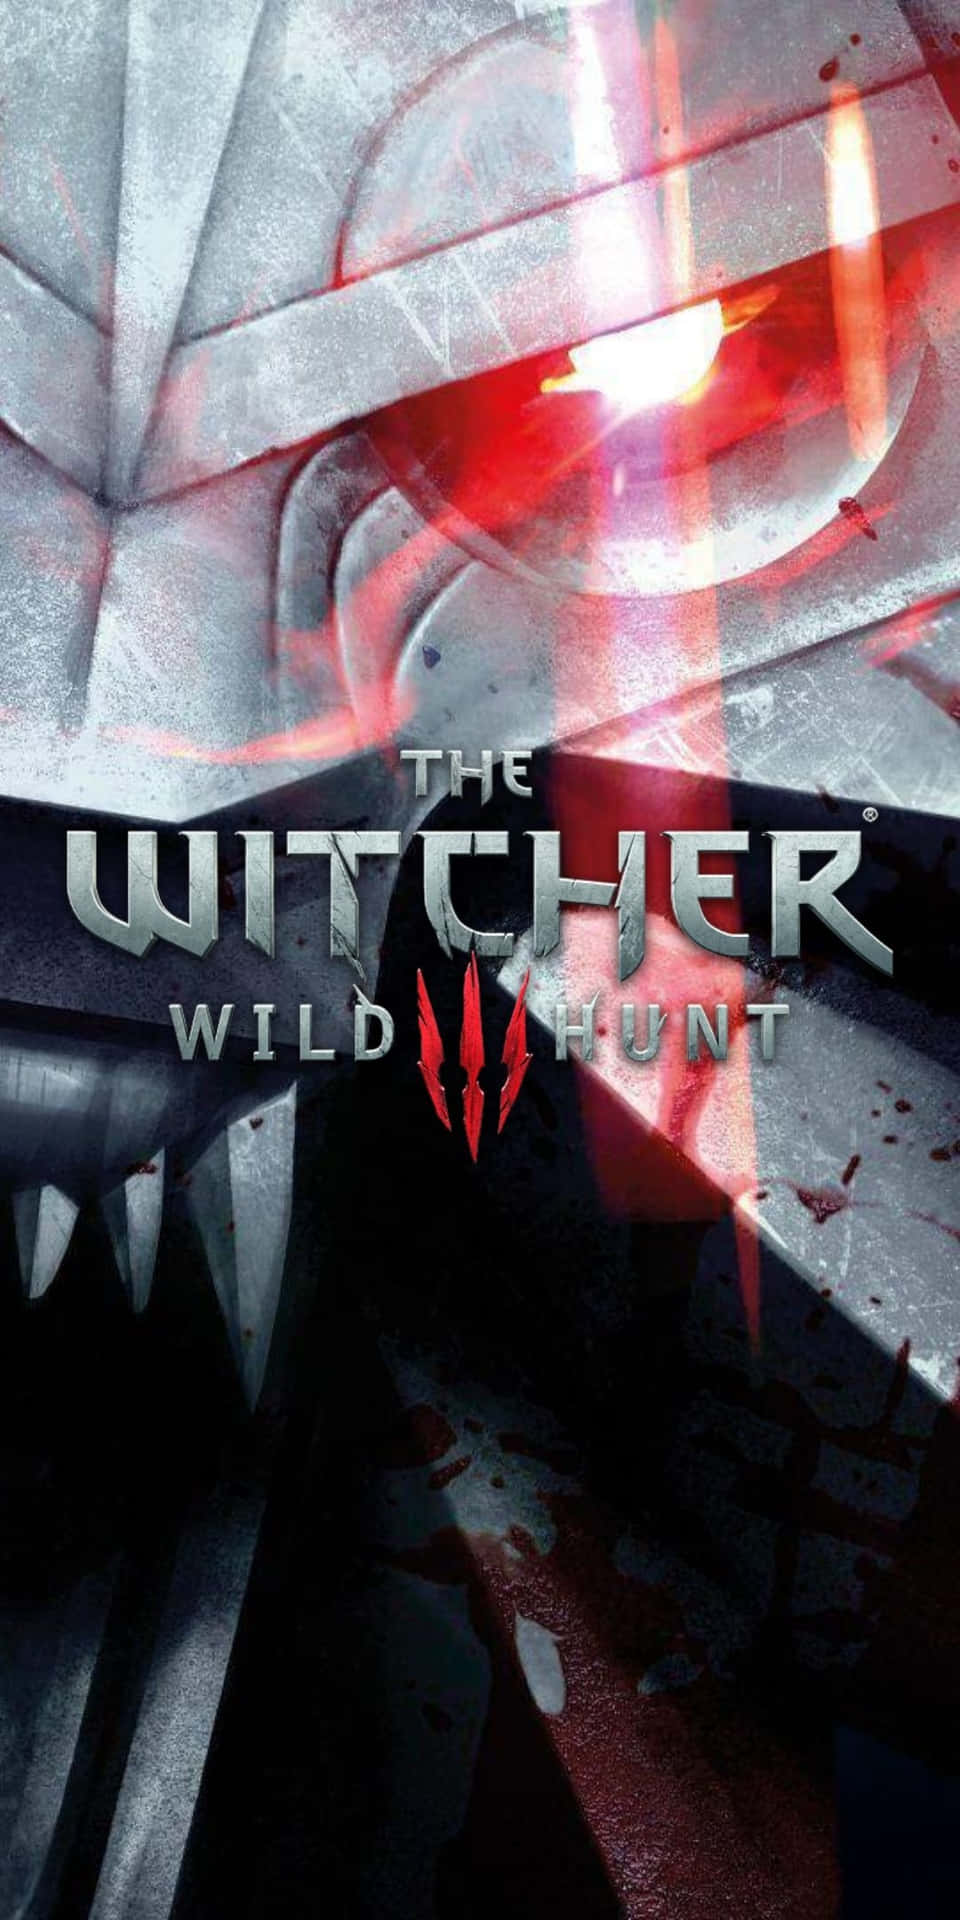 “Explore the Northern Kingdoms in The Witcher 3: Wild Hunt”